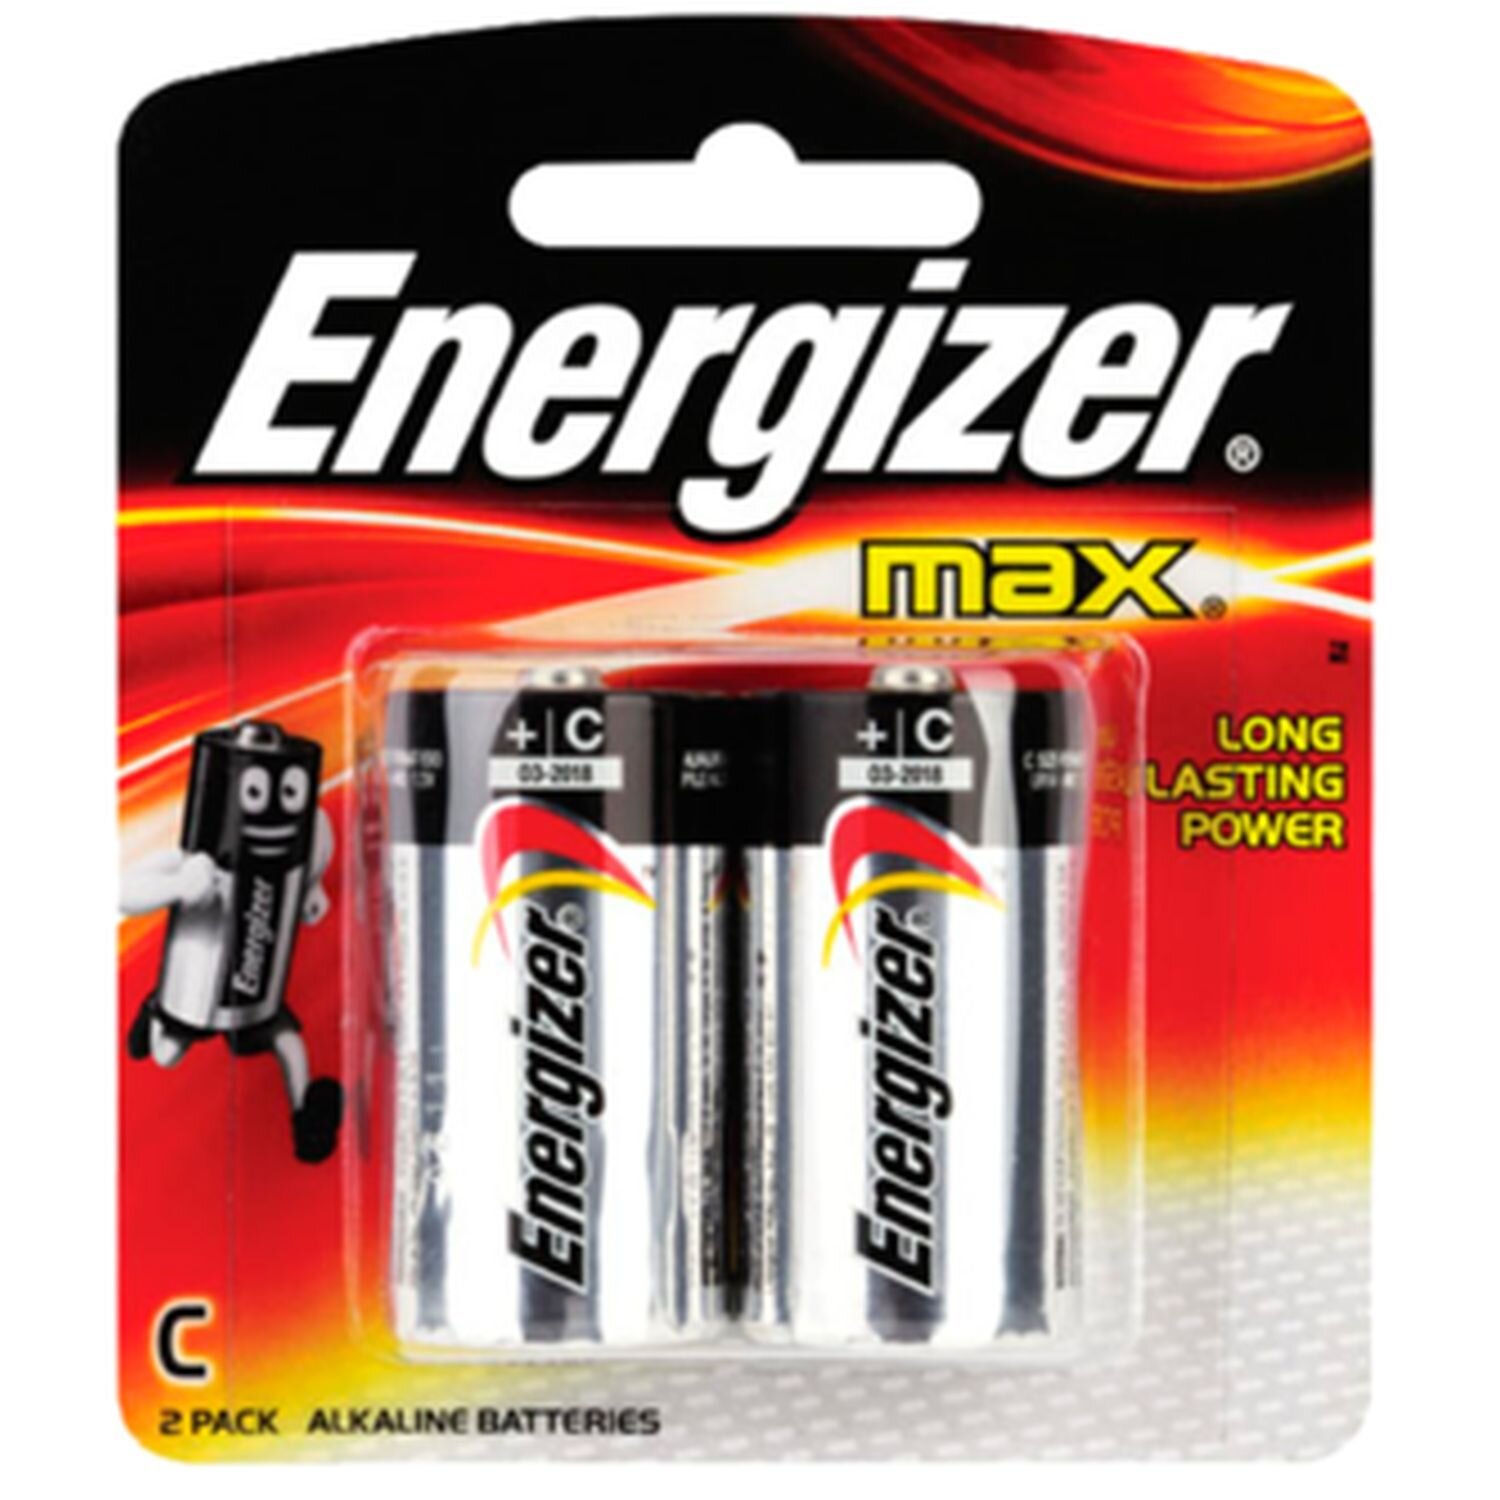 Energizer Max C Battery Packet 2